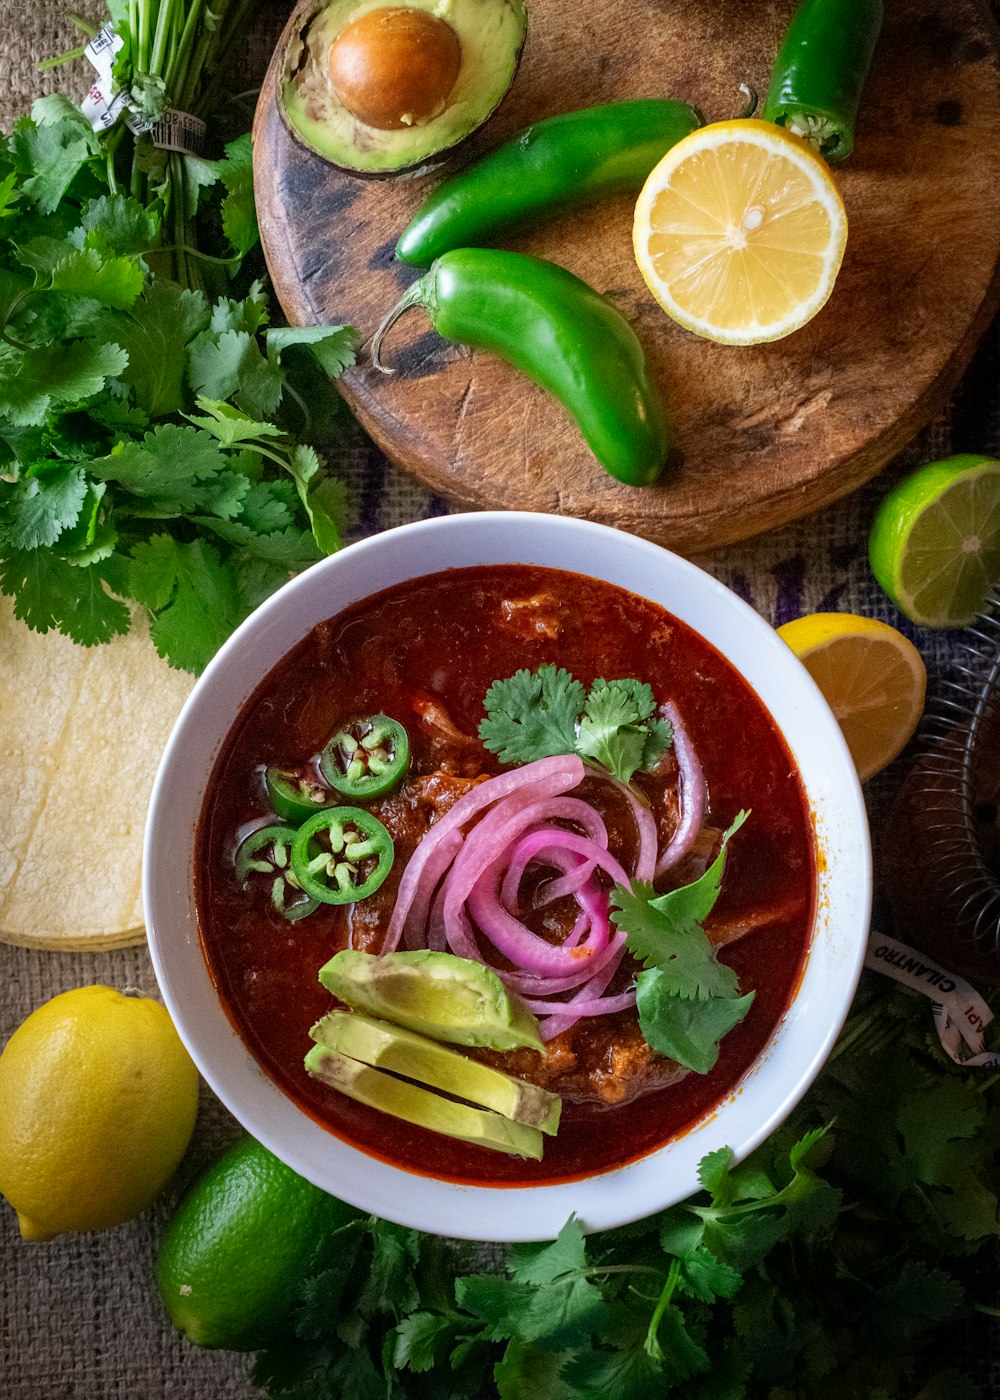 a bowl of soup on a table with limes, cilantro, and